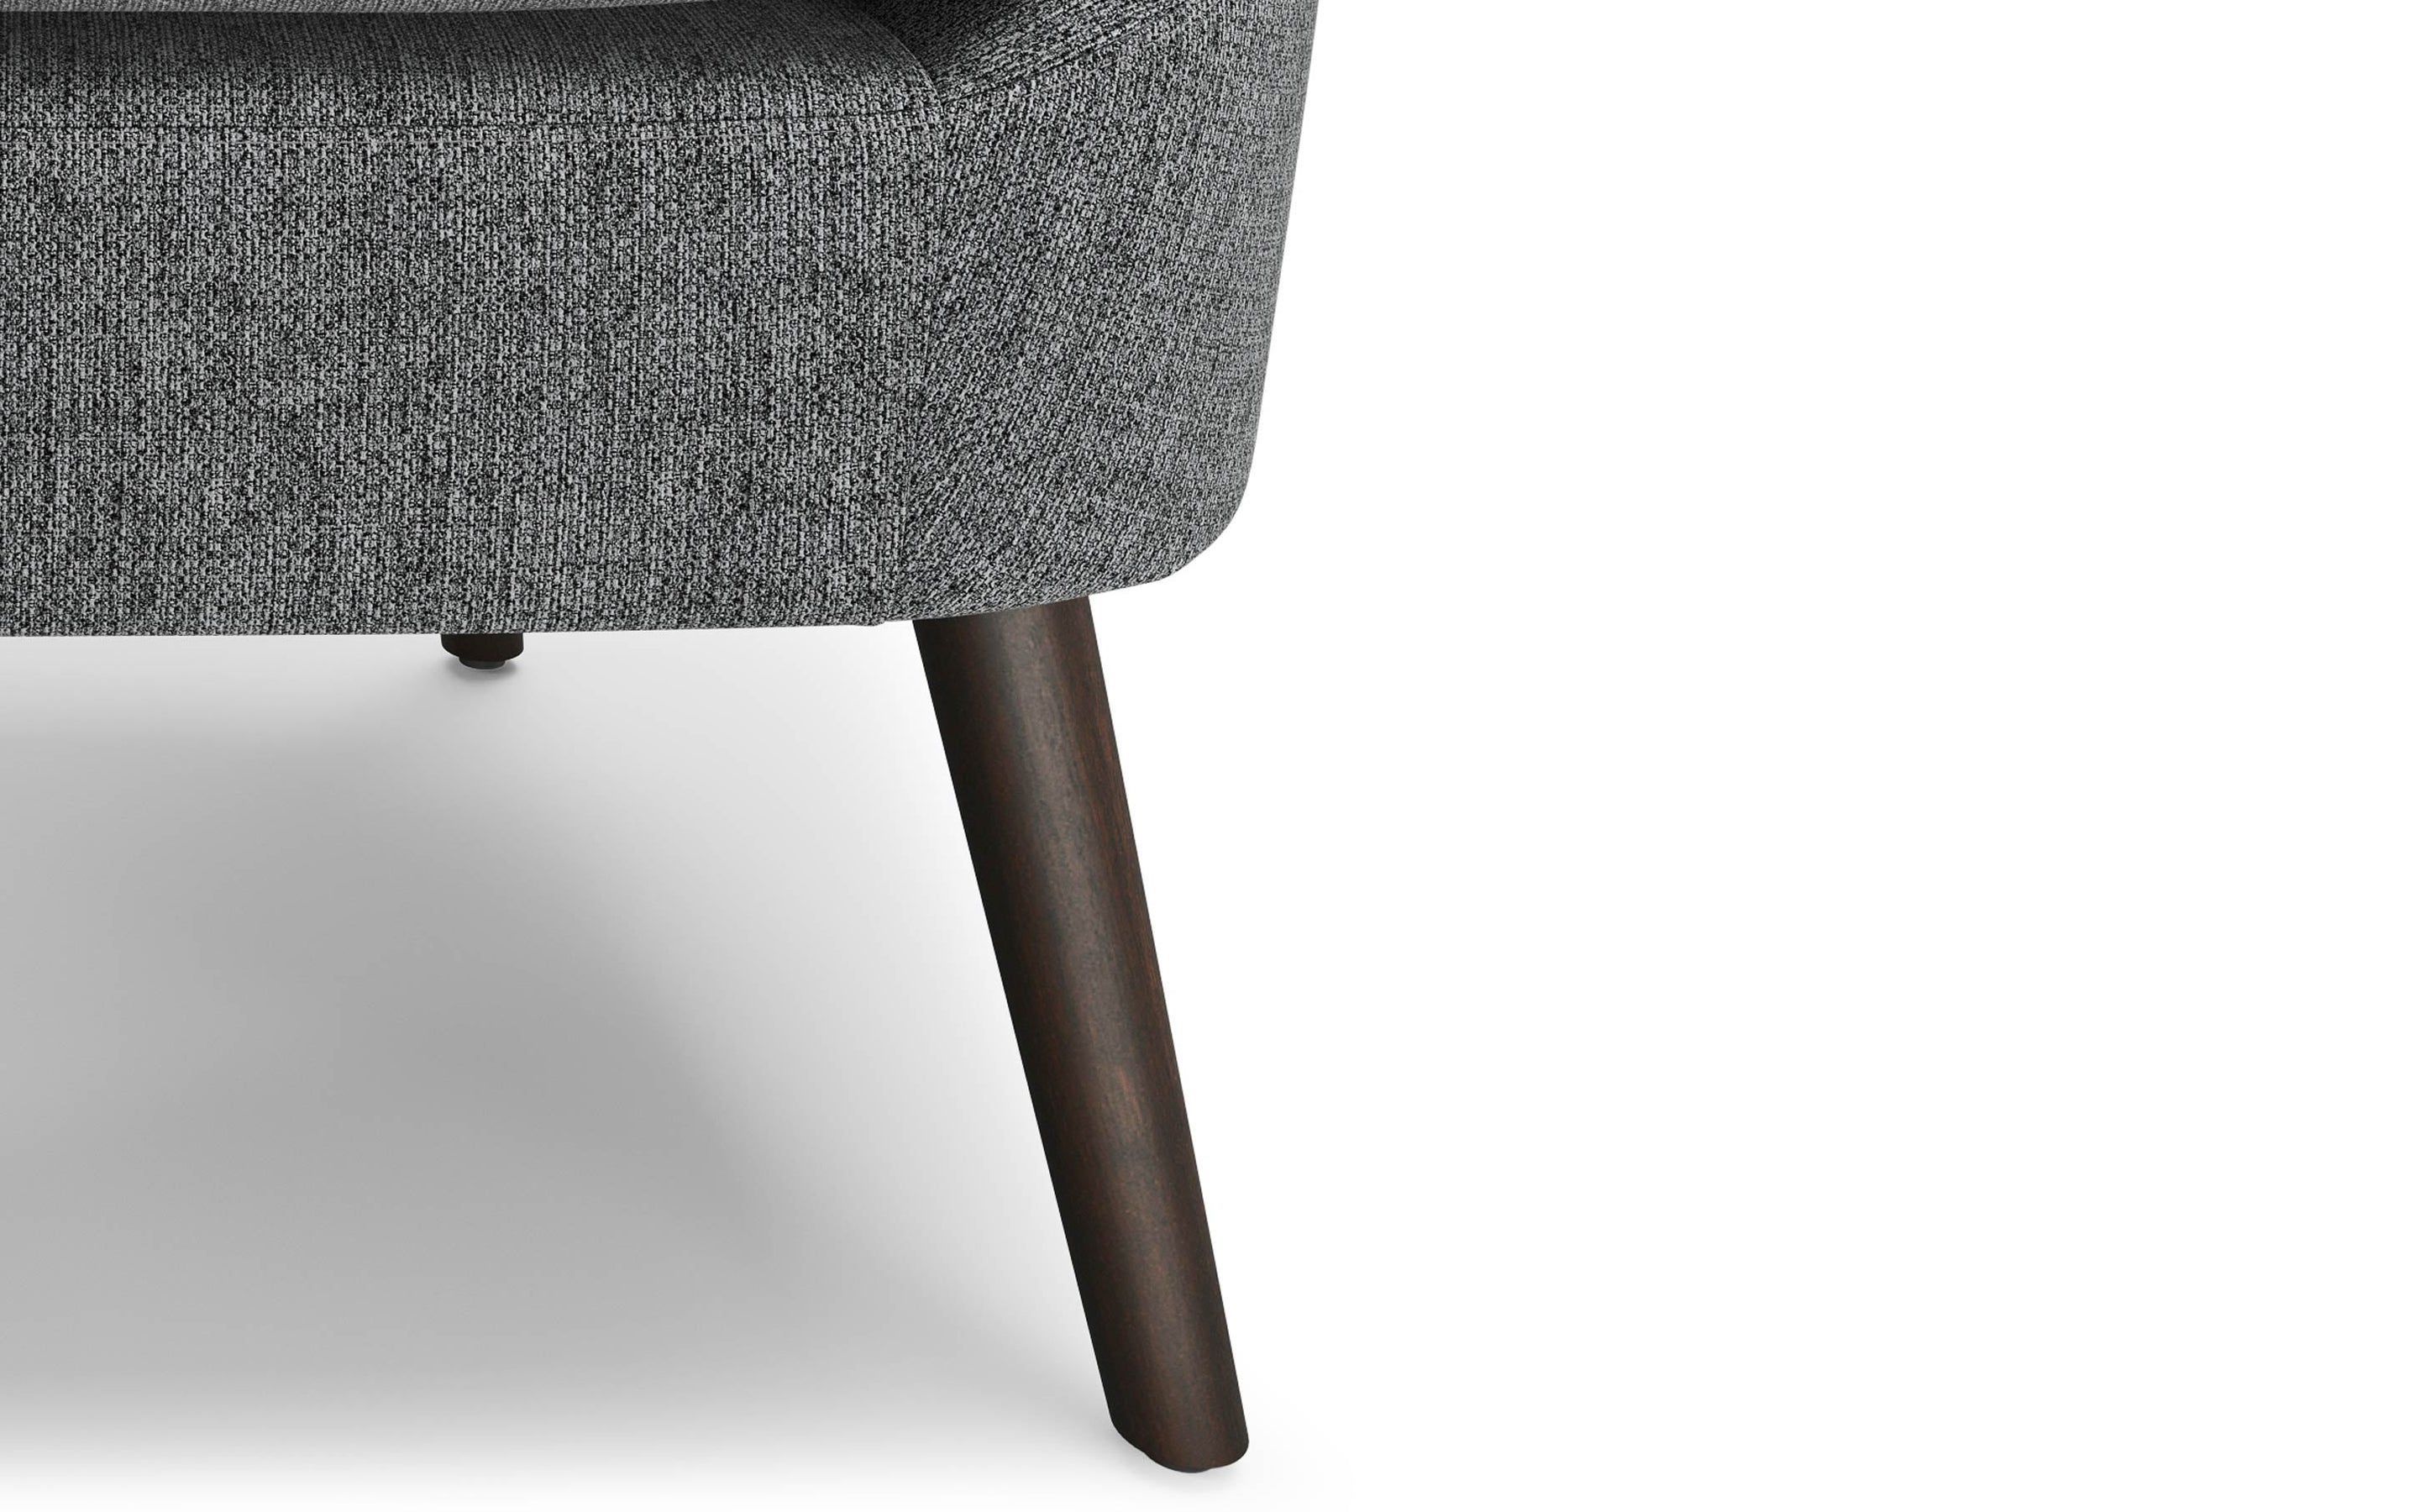 Storm Grey | Redding Accent Chair